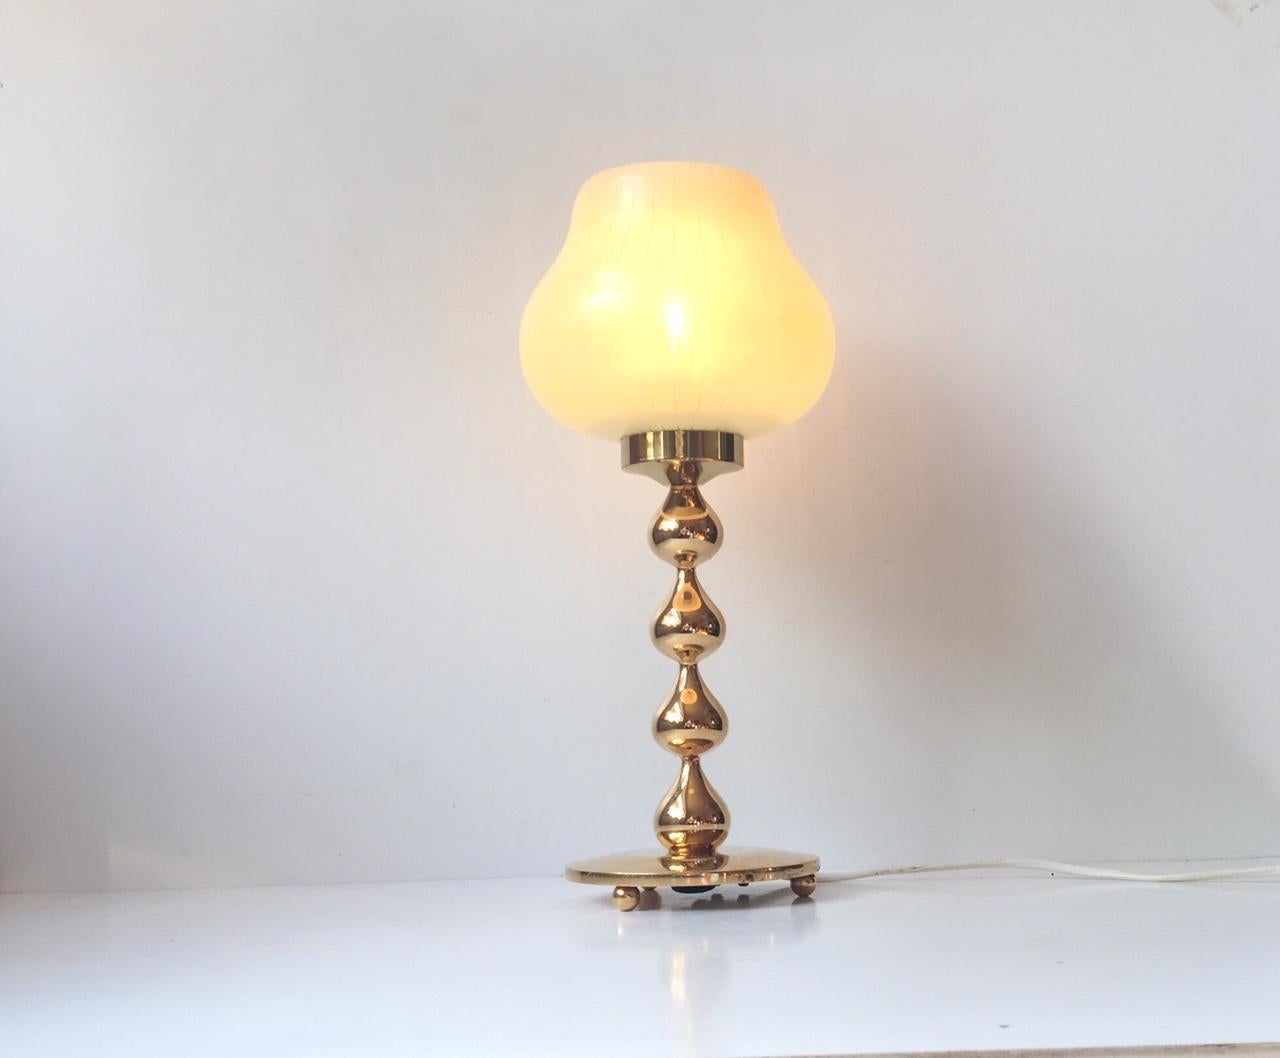 24-carat gold-plated table light composed of four intervened drops. It is mounted with a pin-stripe pastel glass shade. It was designed during the 1960s by Hugo Asmussen in Denmark. The base/foot of the light shows ware and patina due to patination